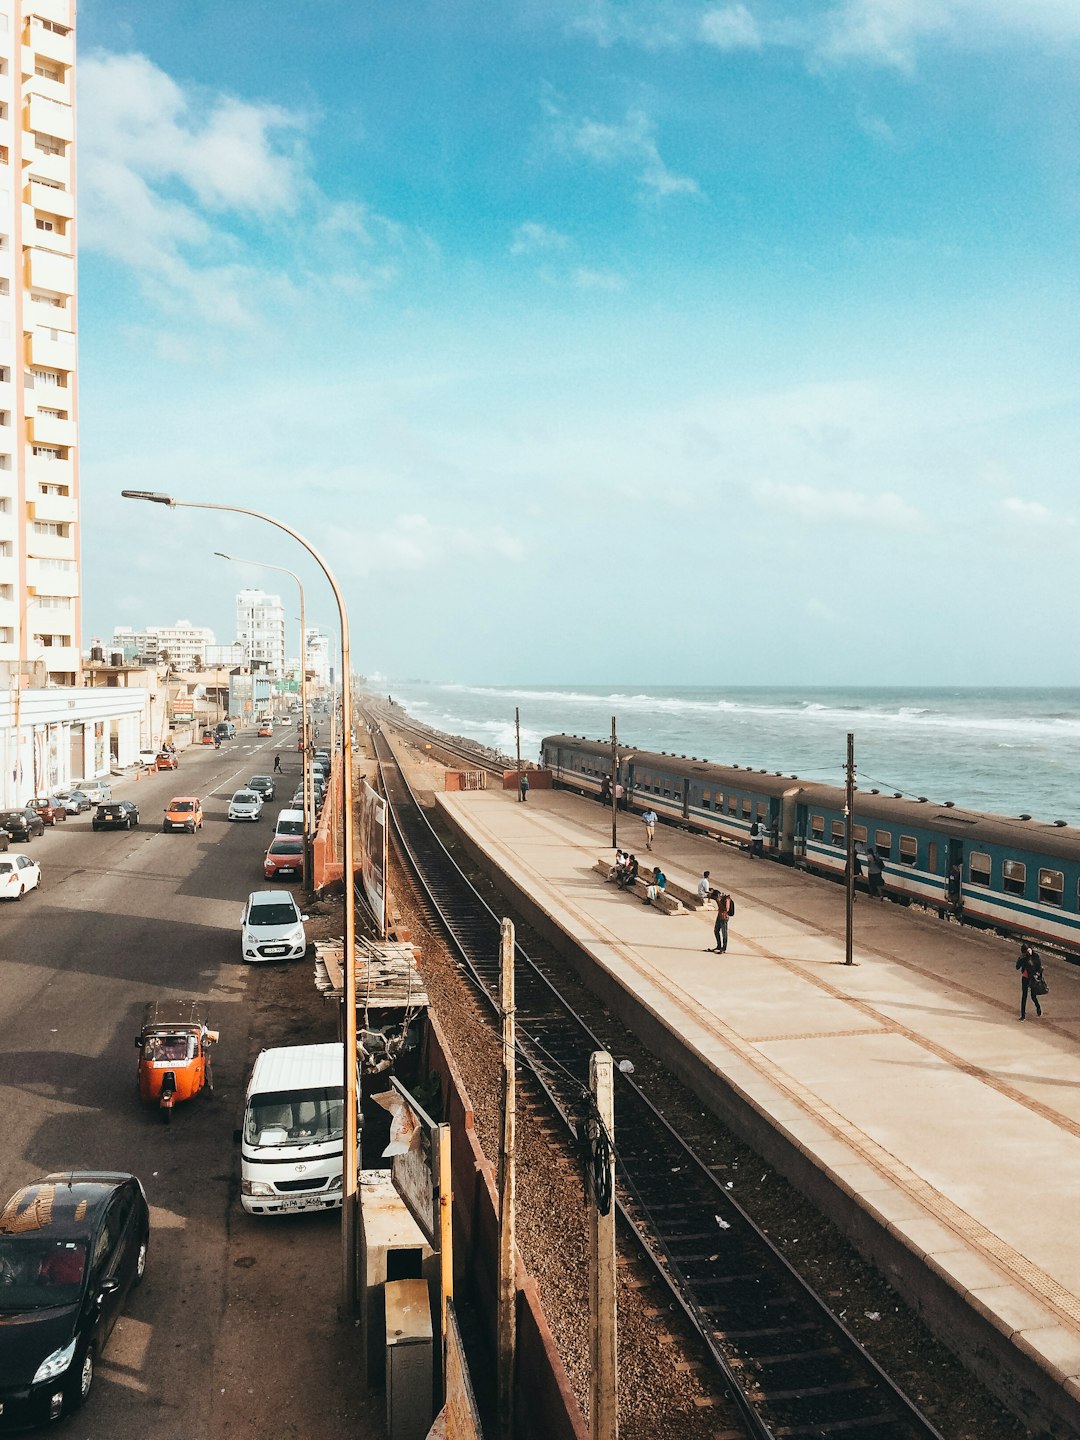 Travel Tips and Stories of Colombo in Sri Lanka